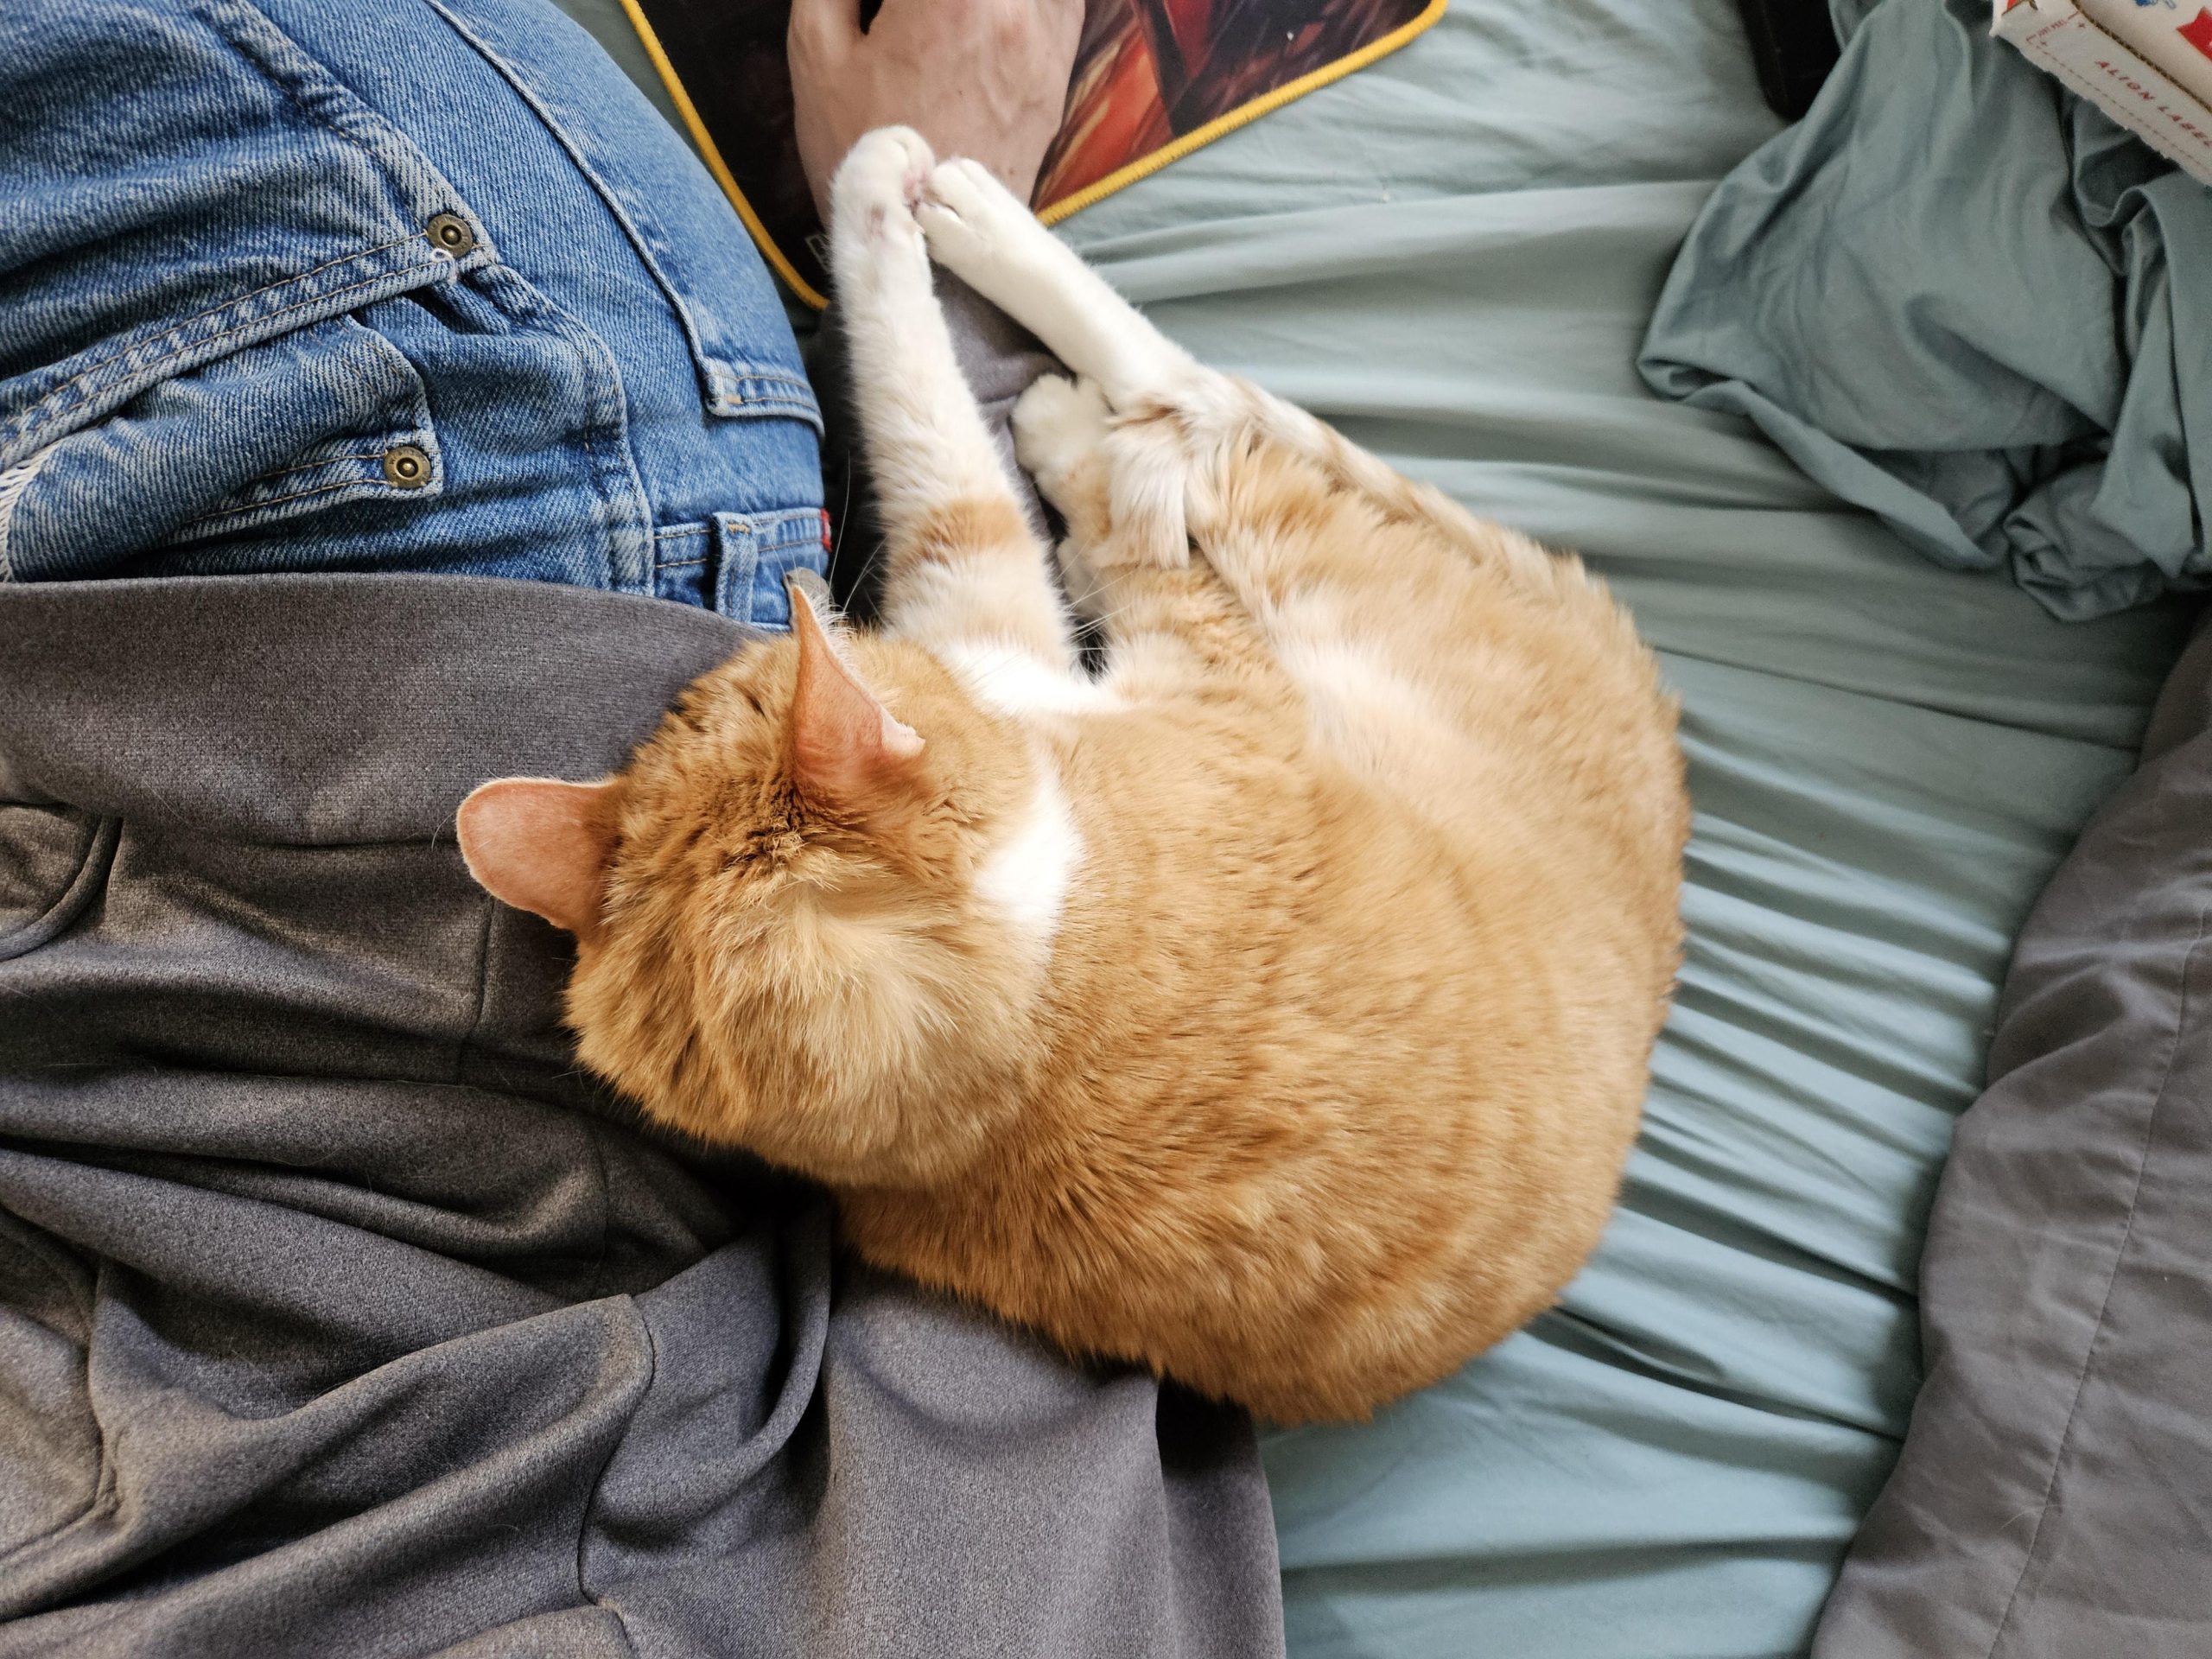 Meatloaf cuddles the butt whereas I play video games.